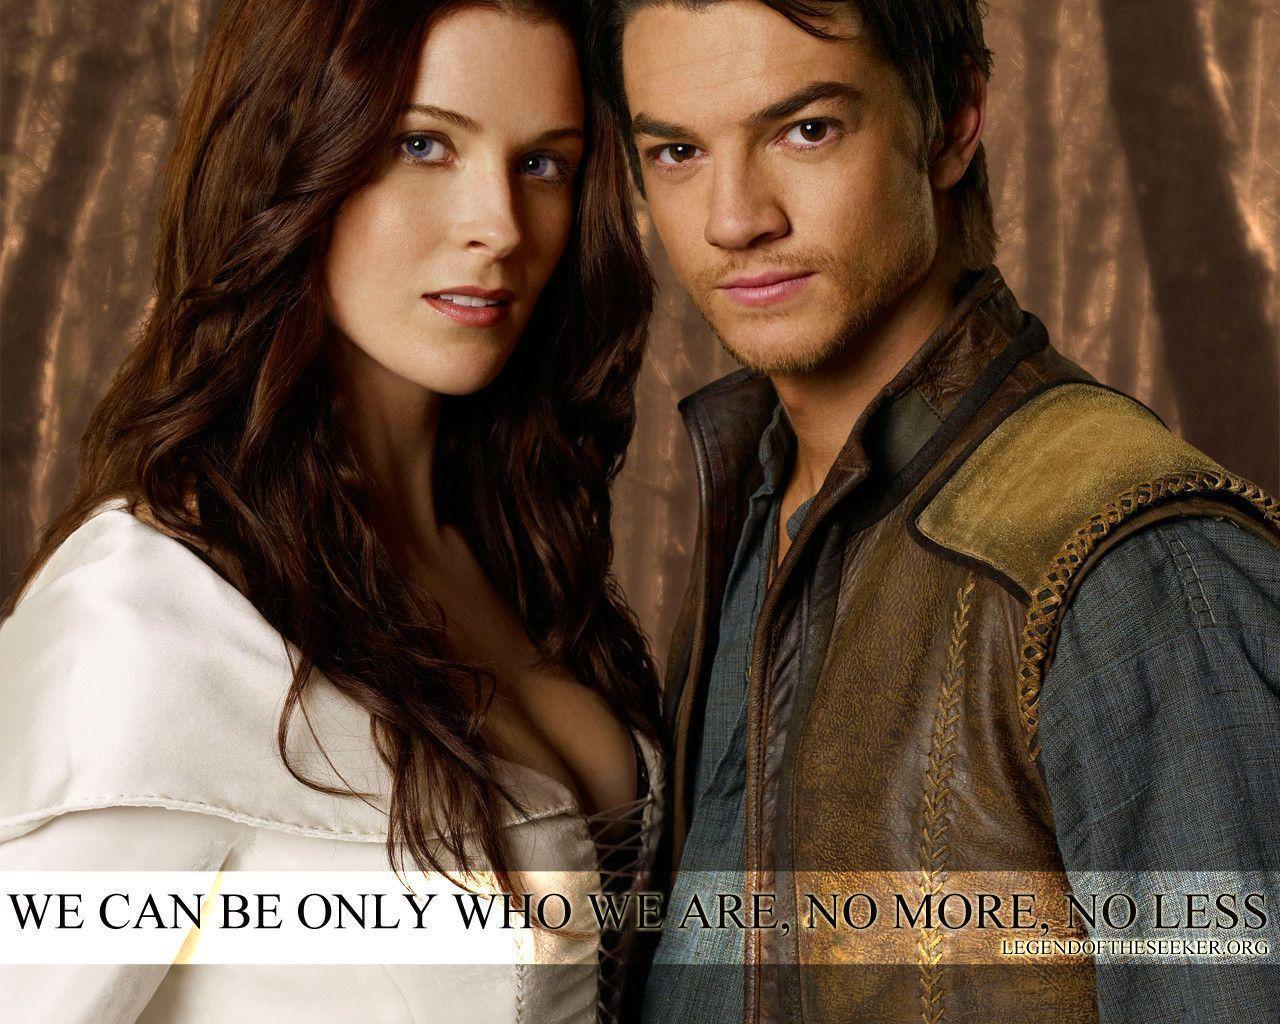 image For > Legend Of The Seeker Wallpaper Richard And Kahlan